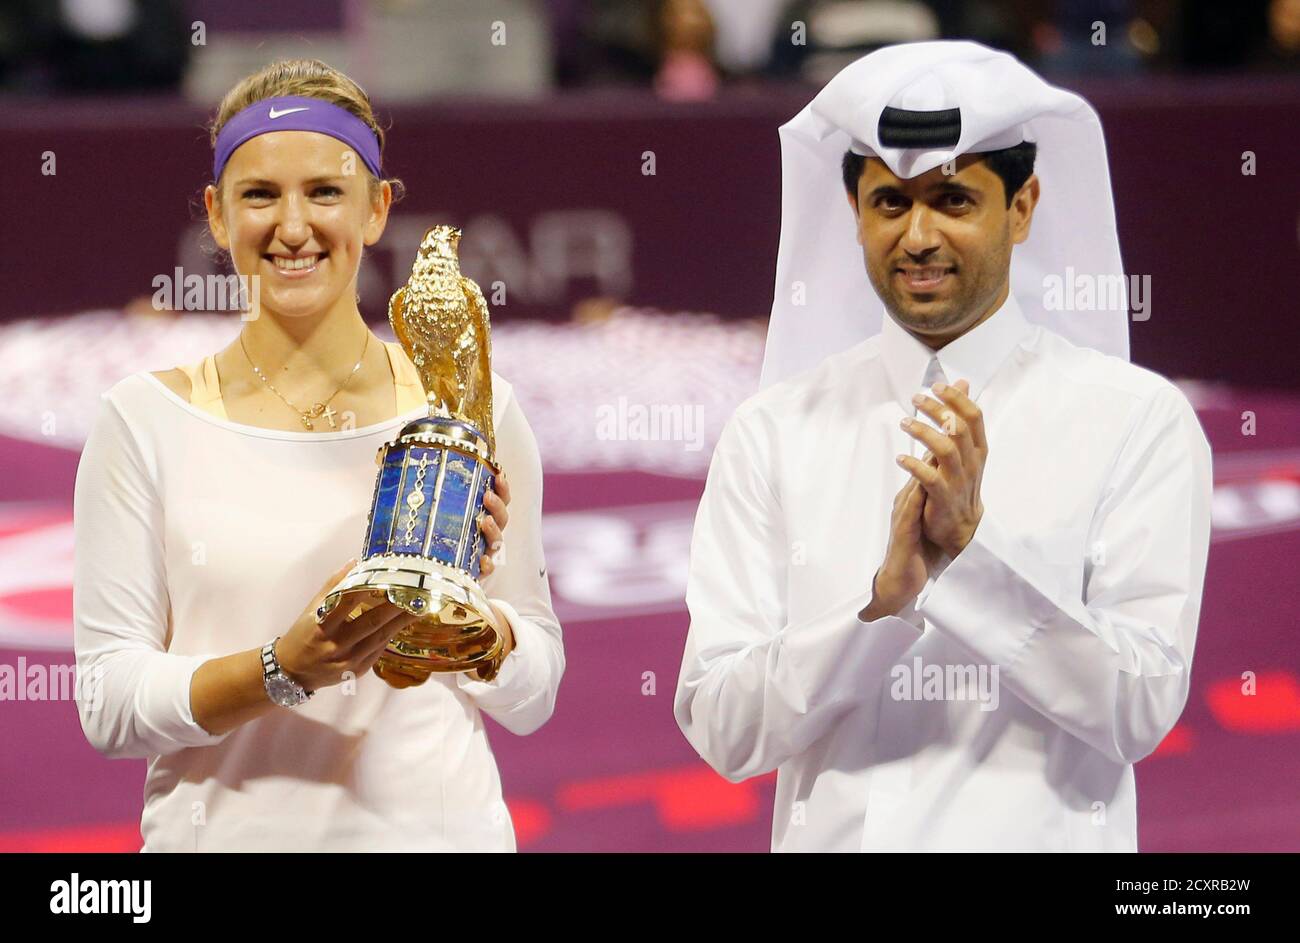 Victoria Azarenka (L) of Belarus holds her trophy beside President of the  Qatar Tennis Federation Nasser Al-Khelaifi, after defeating Serena Williams  of the U.S. in their women's singles final tennis match at